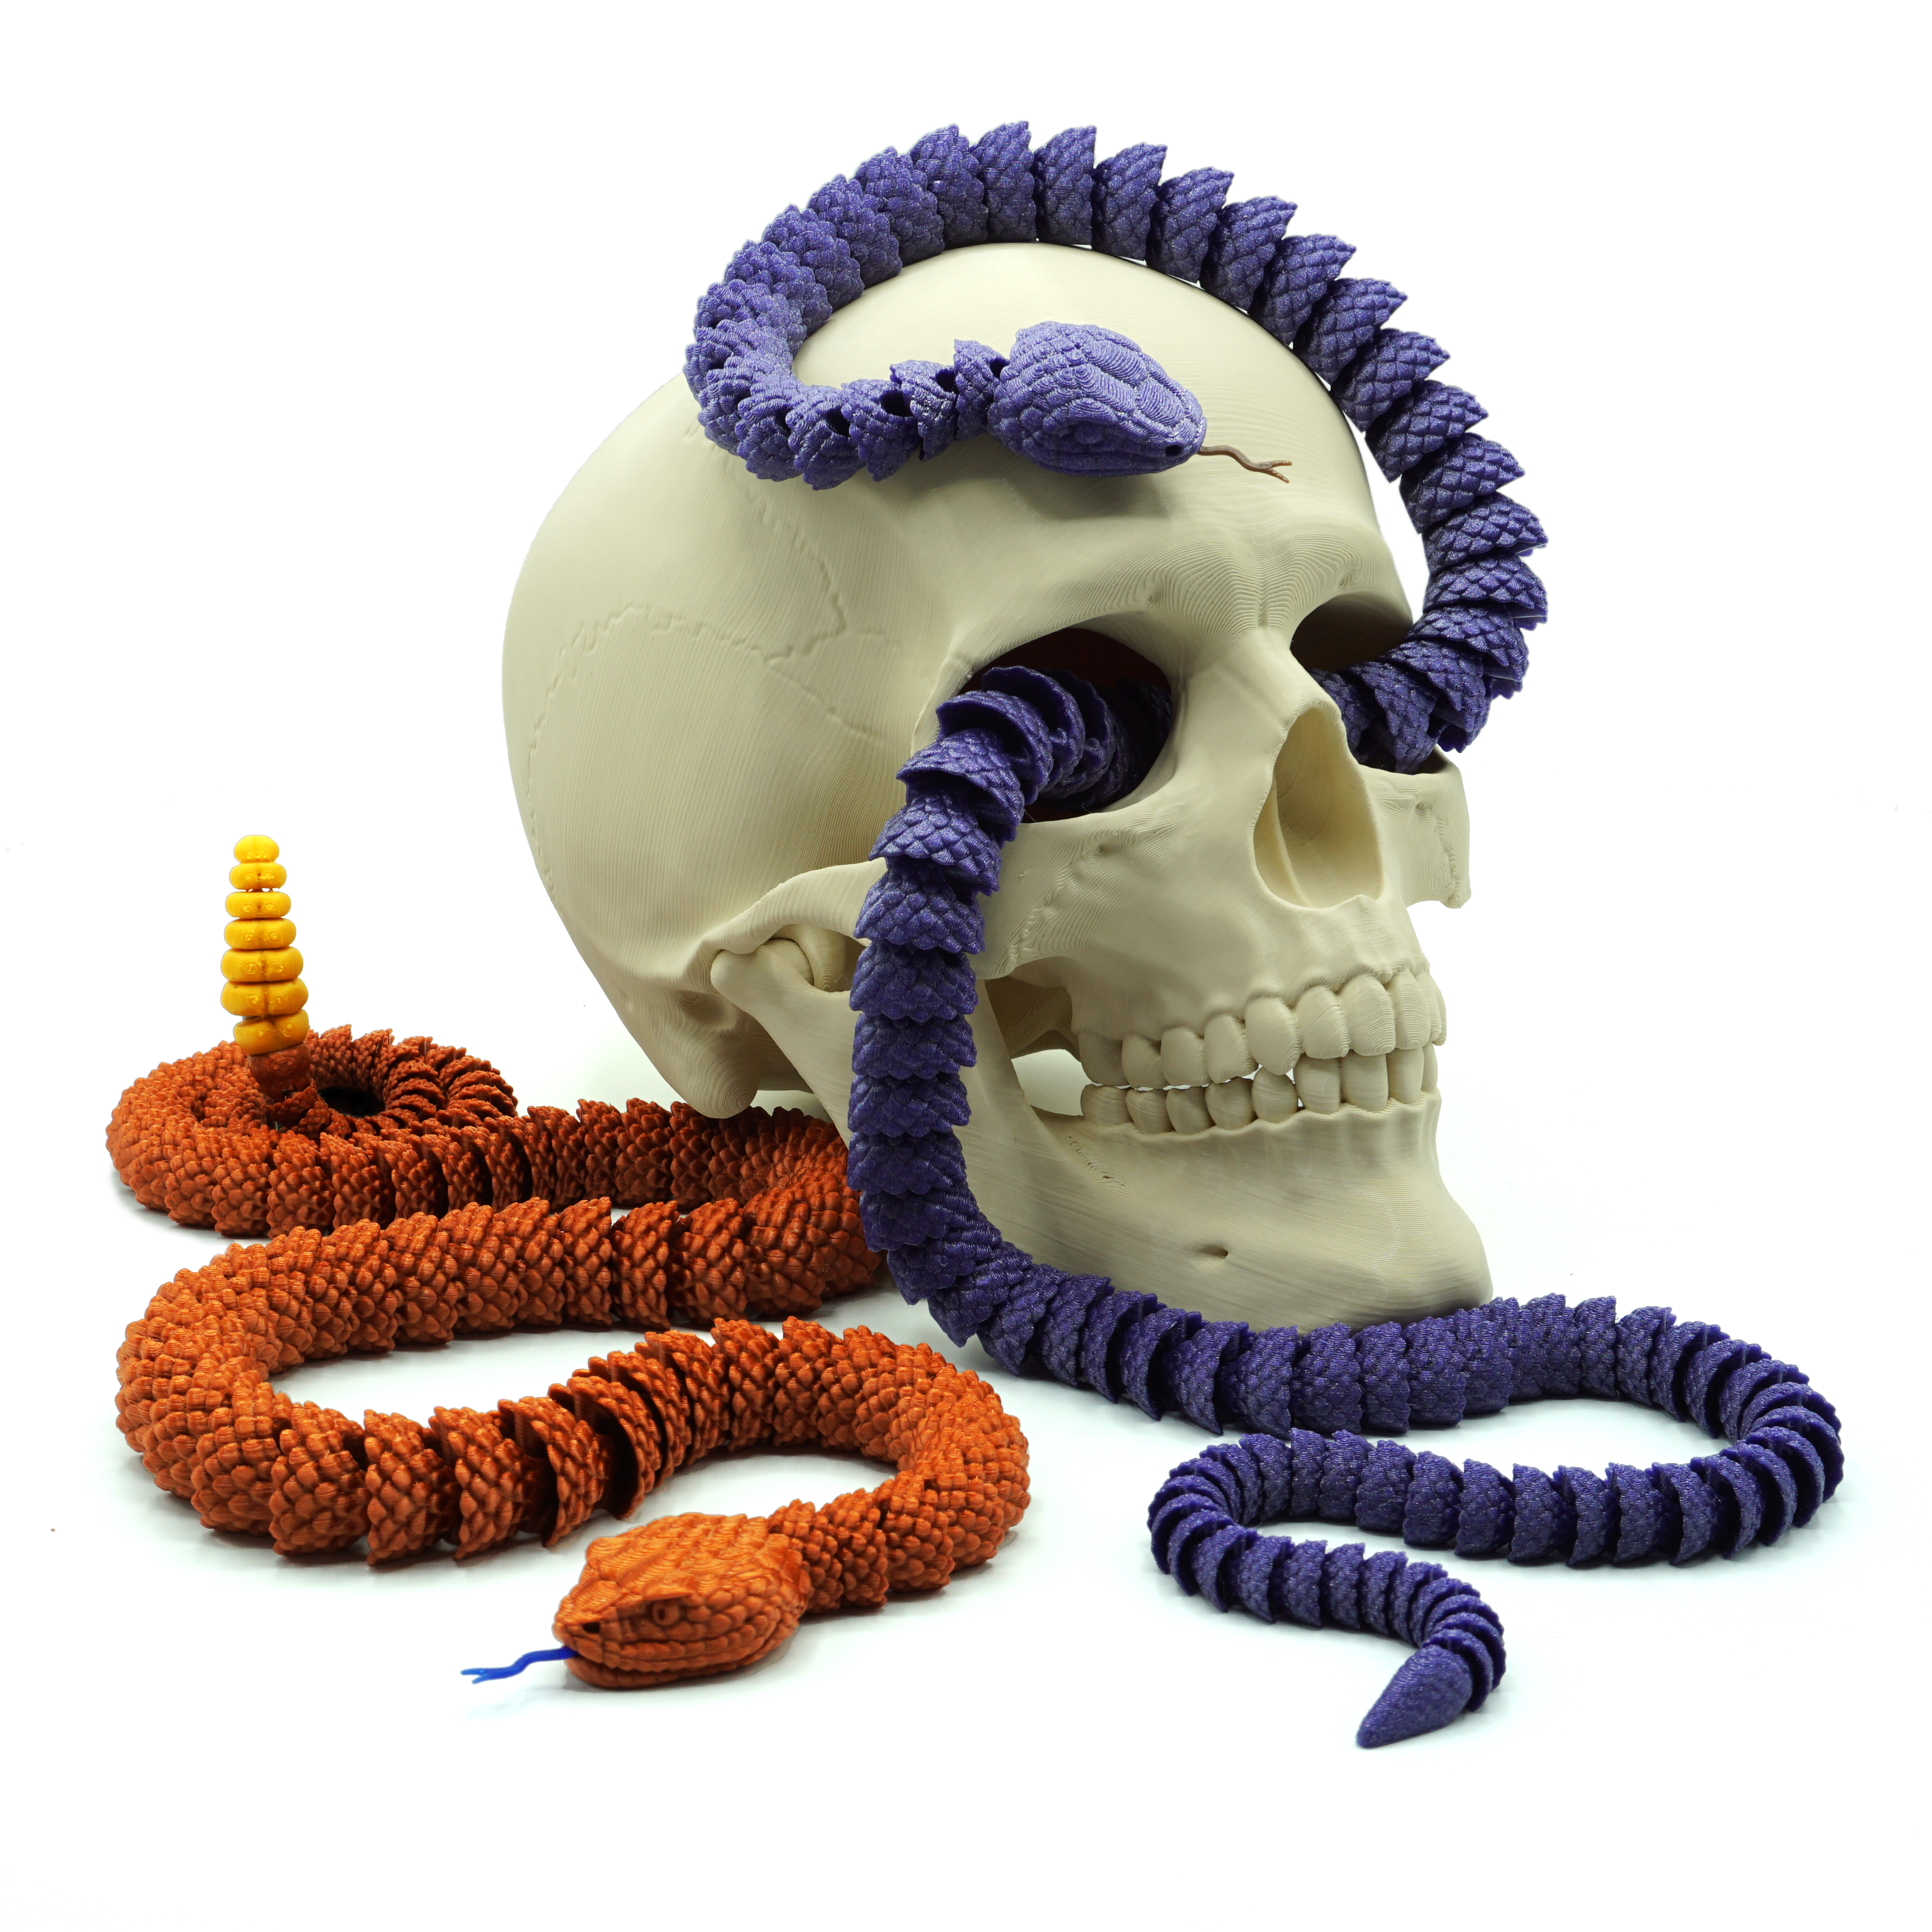 Articulated Snake | 3D-printed locally by independent makers.